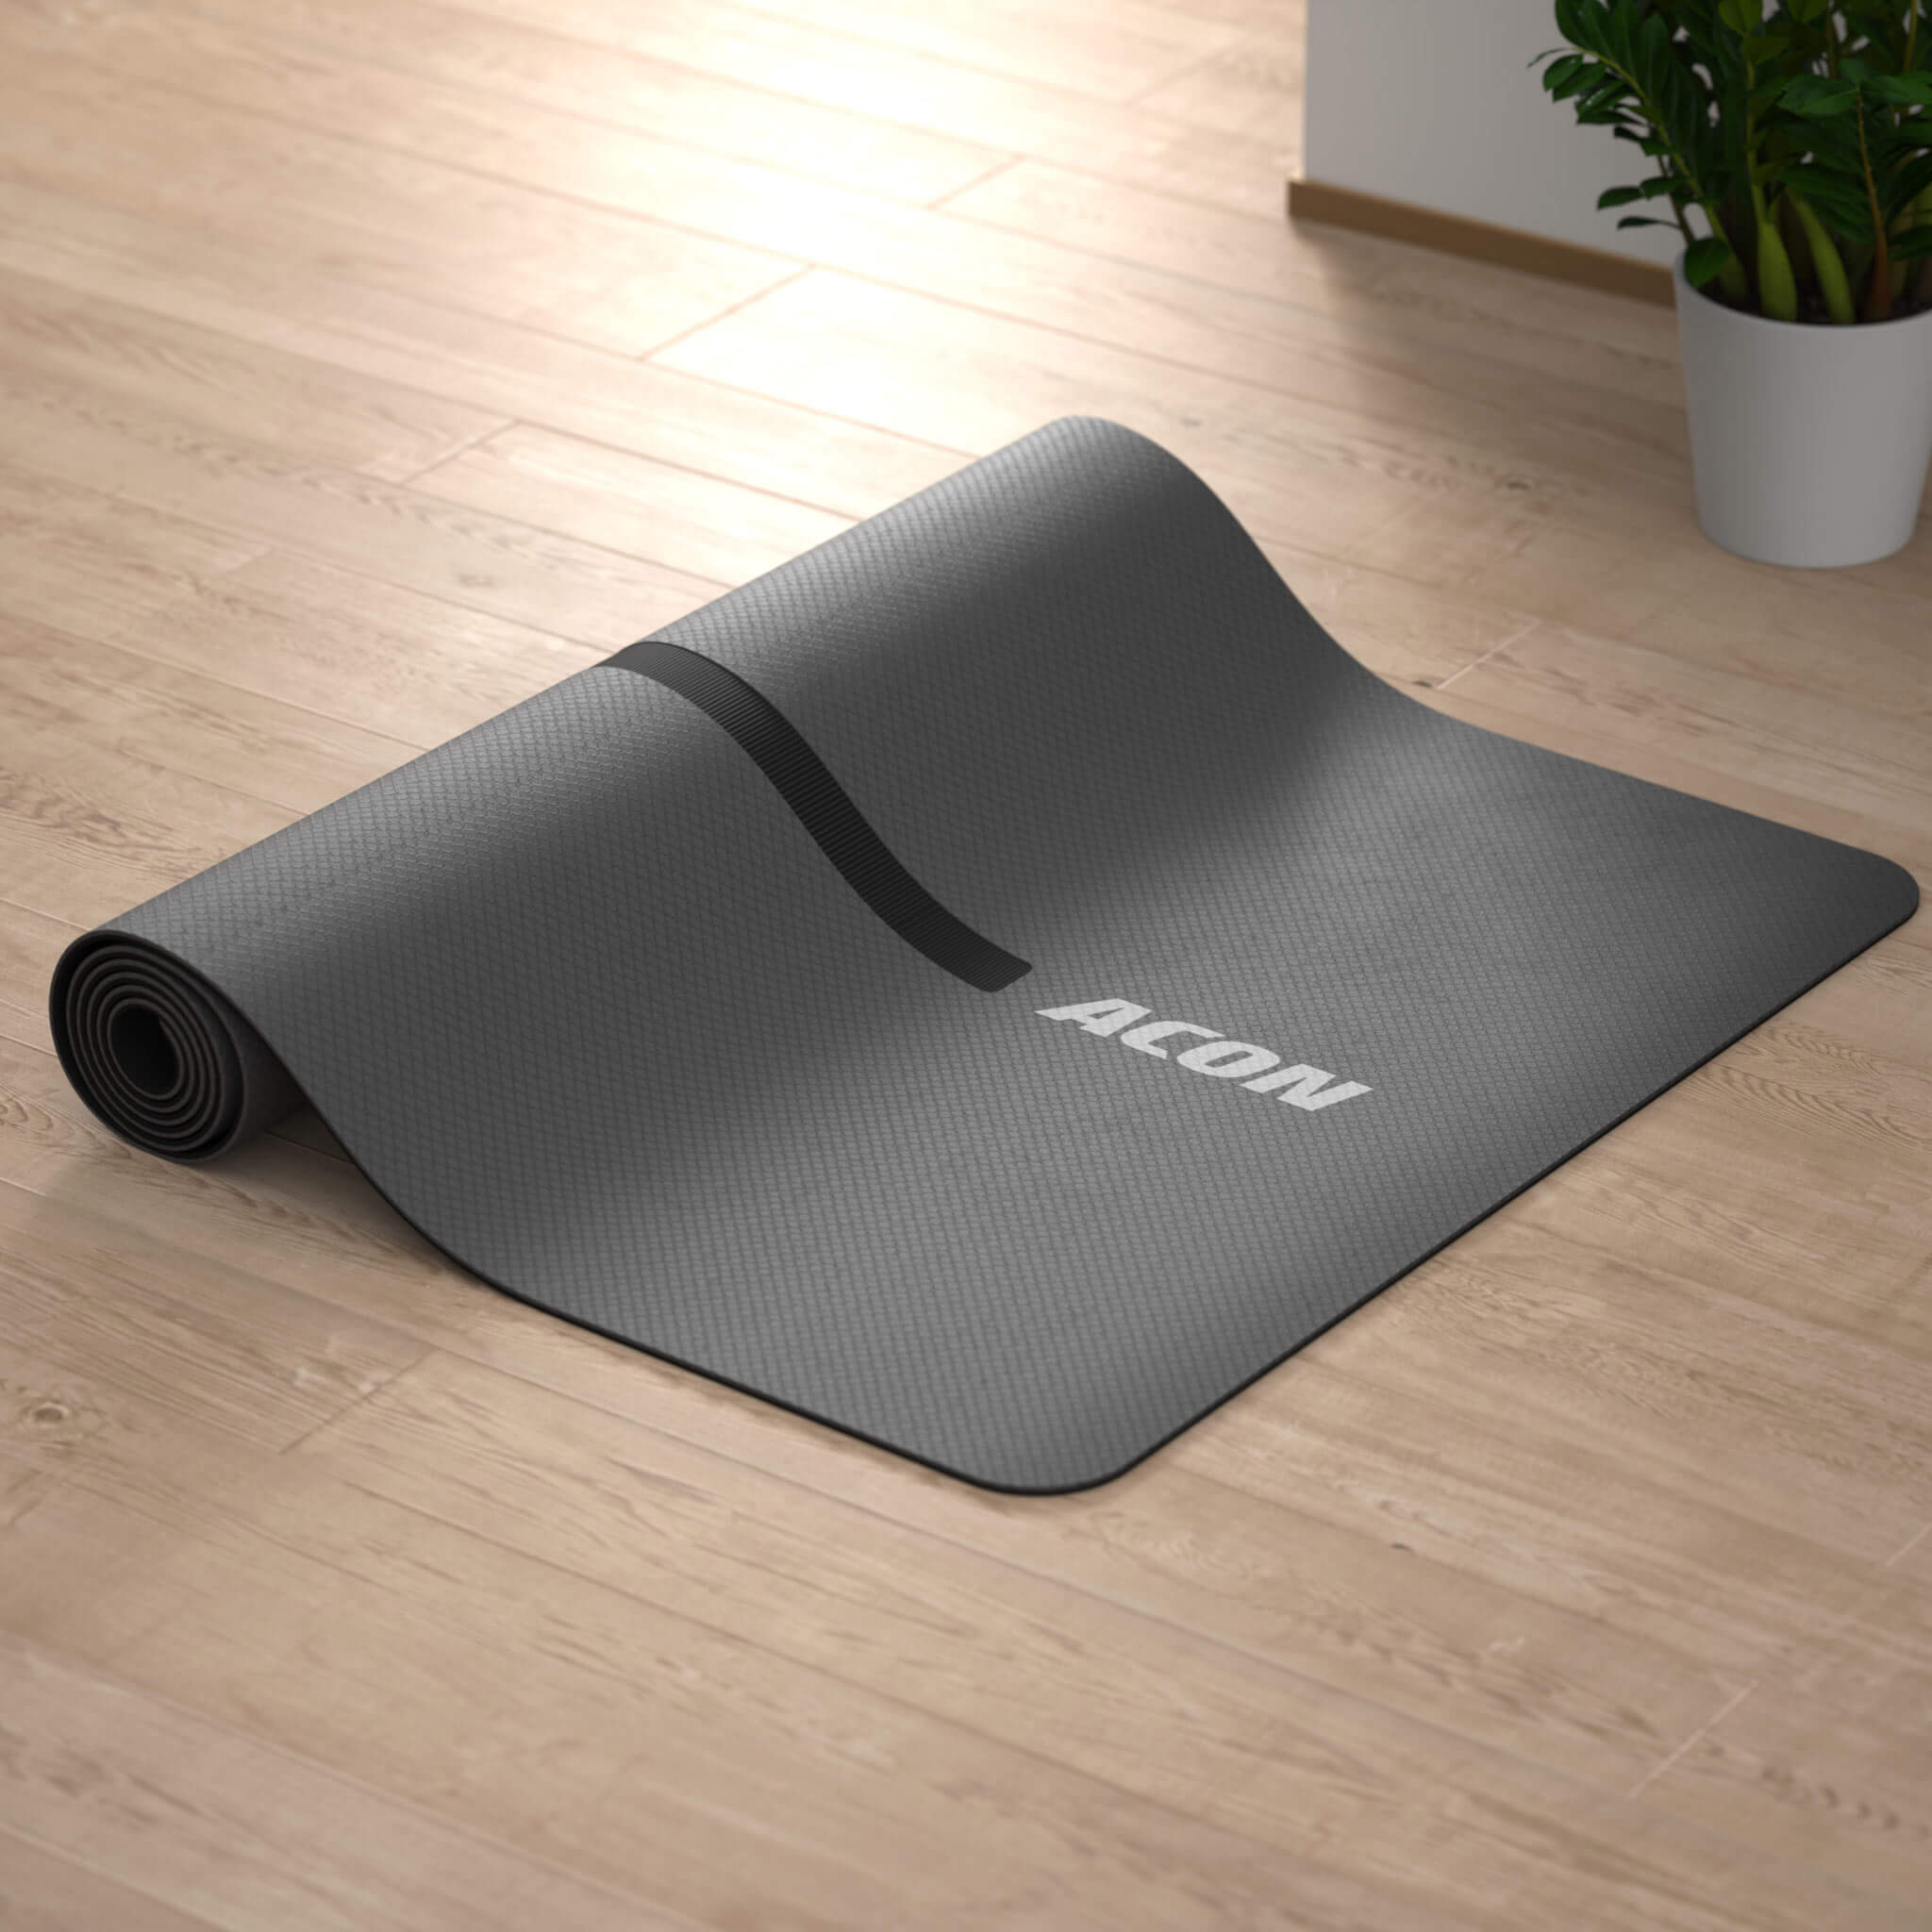 Acon FIT yoga mat on the living room floor.